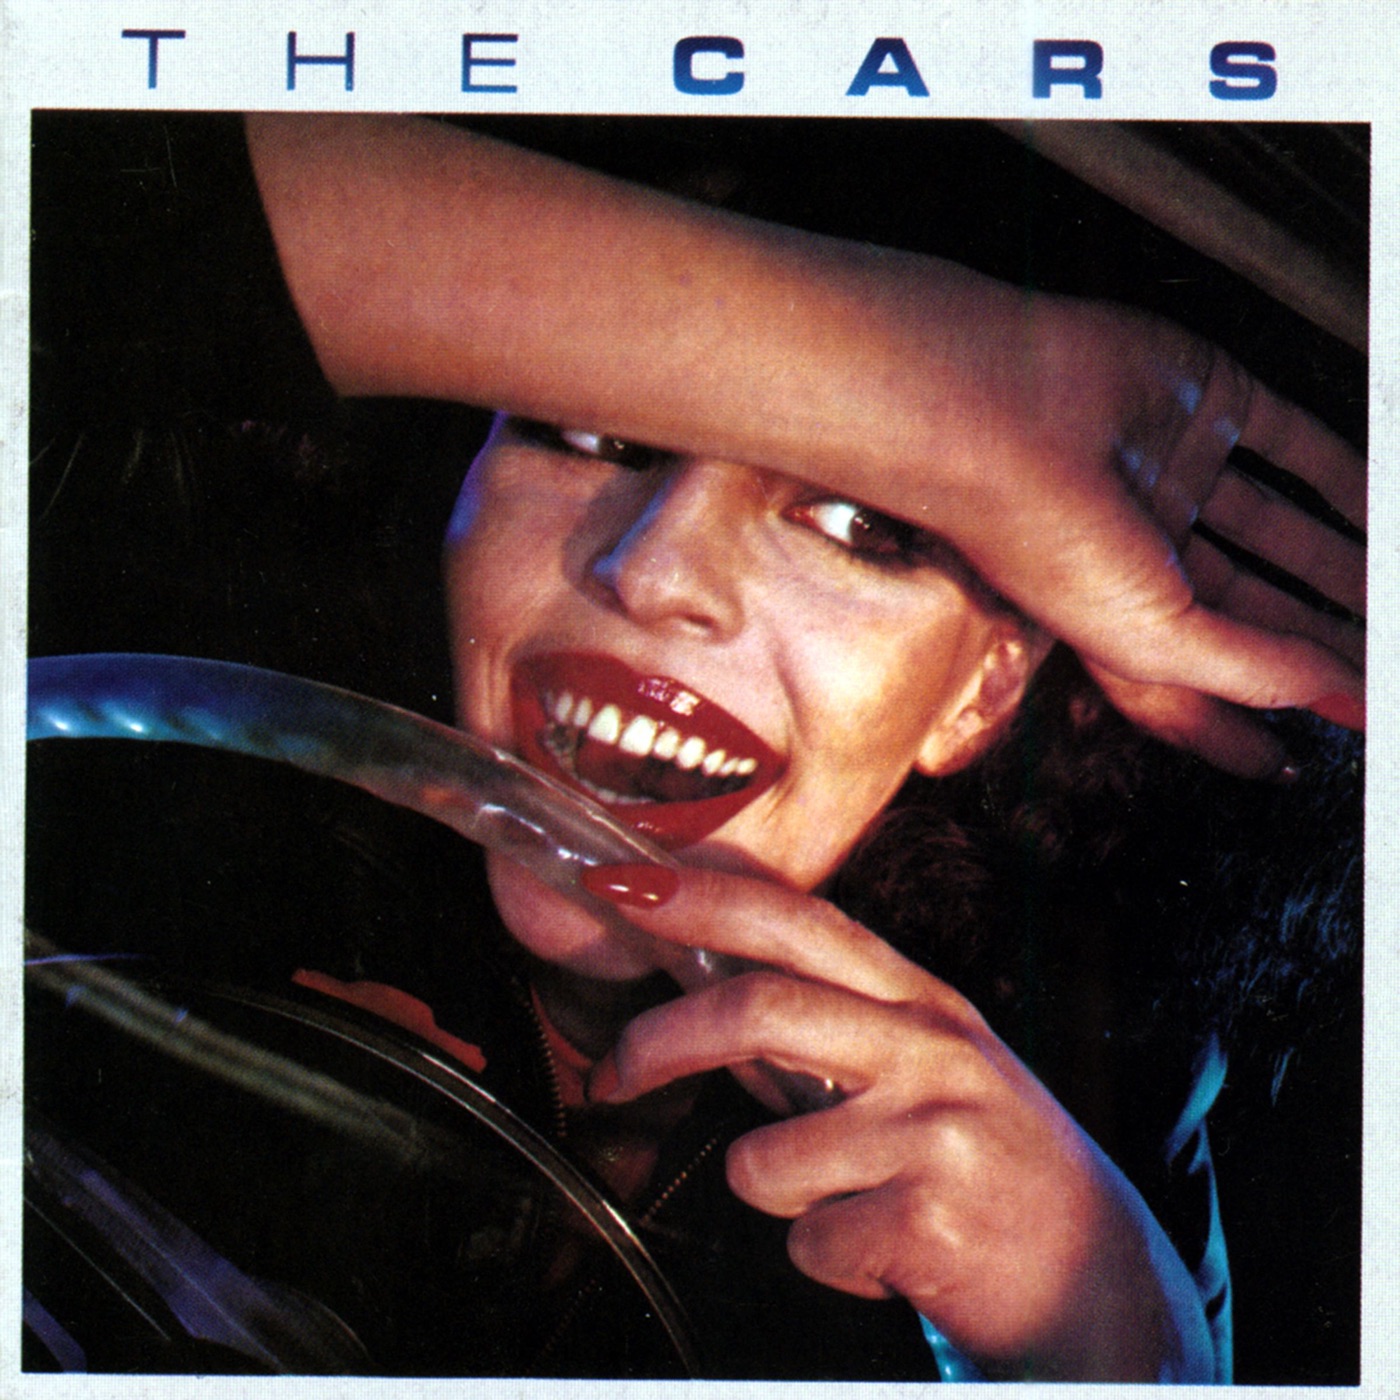 The Cars by The Cars